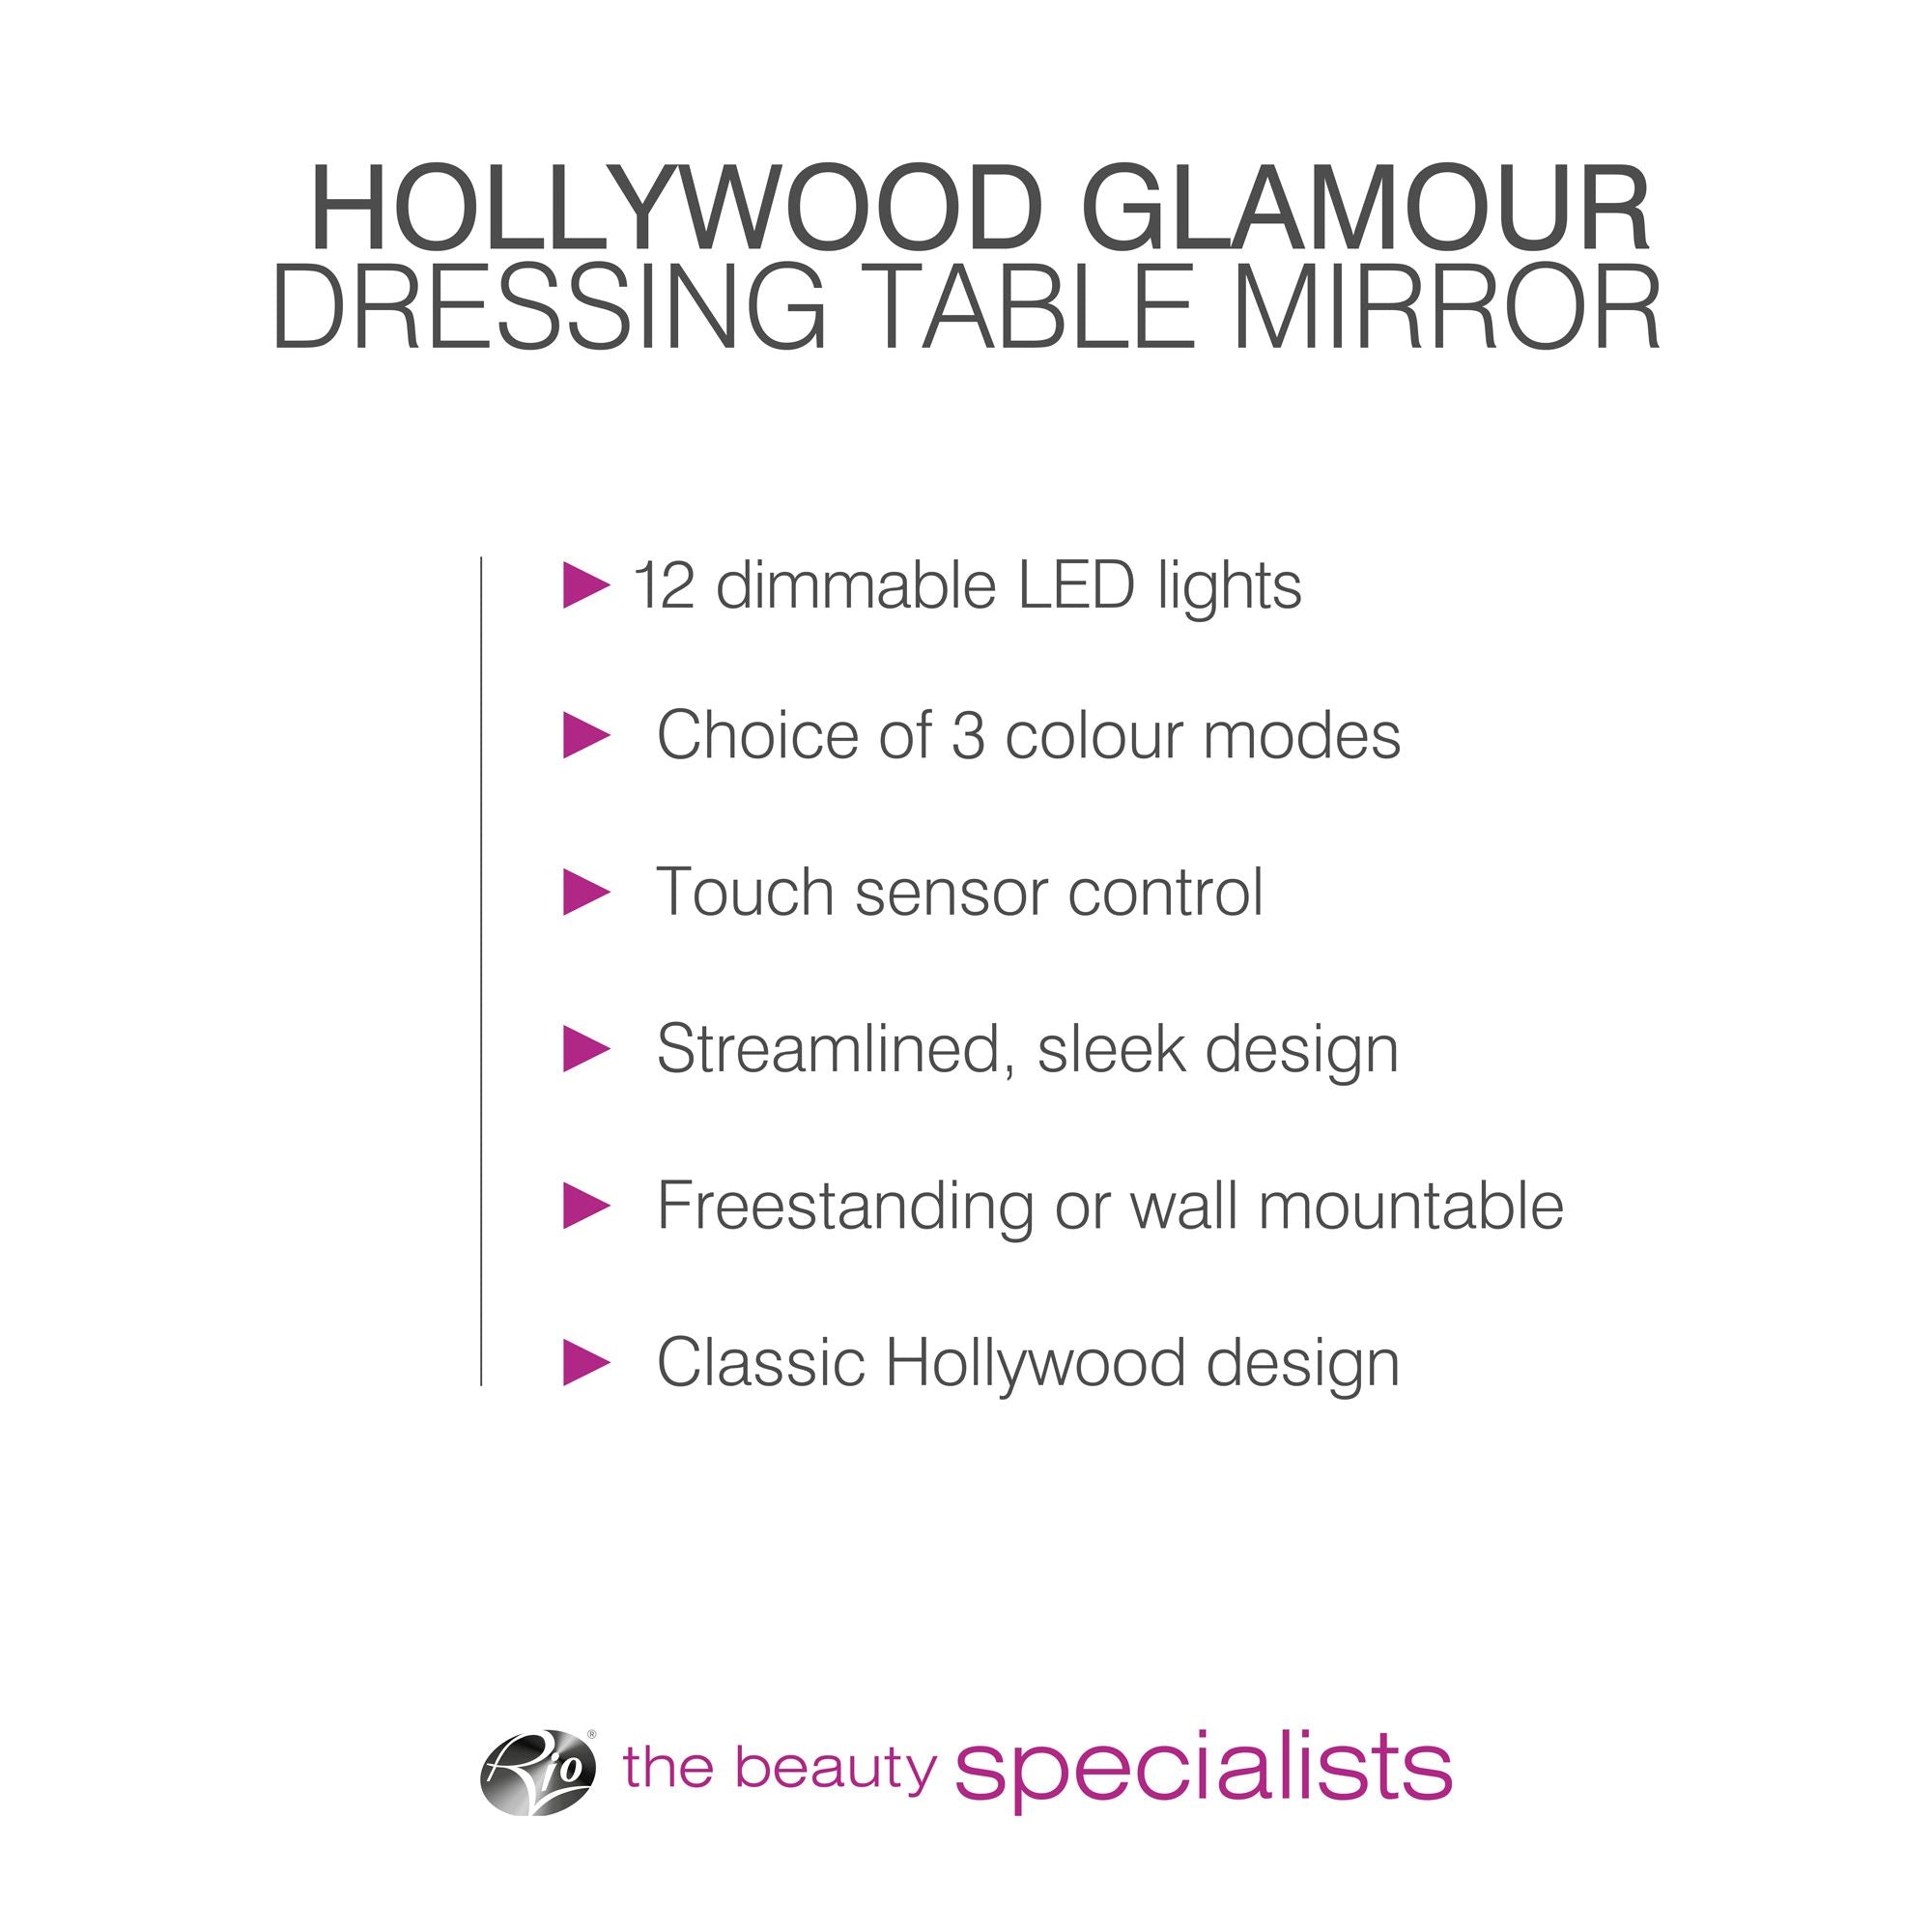 Hollywood Glamour Dressing Table Mirror